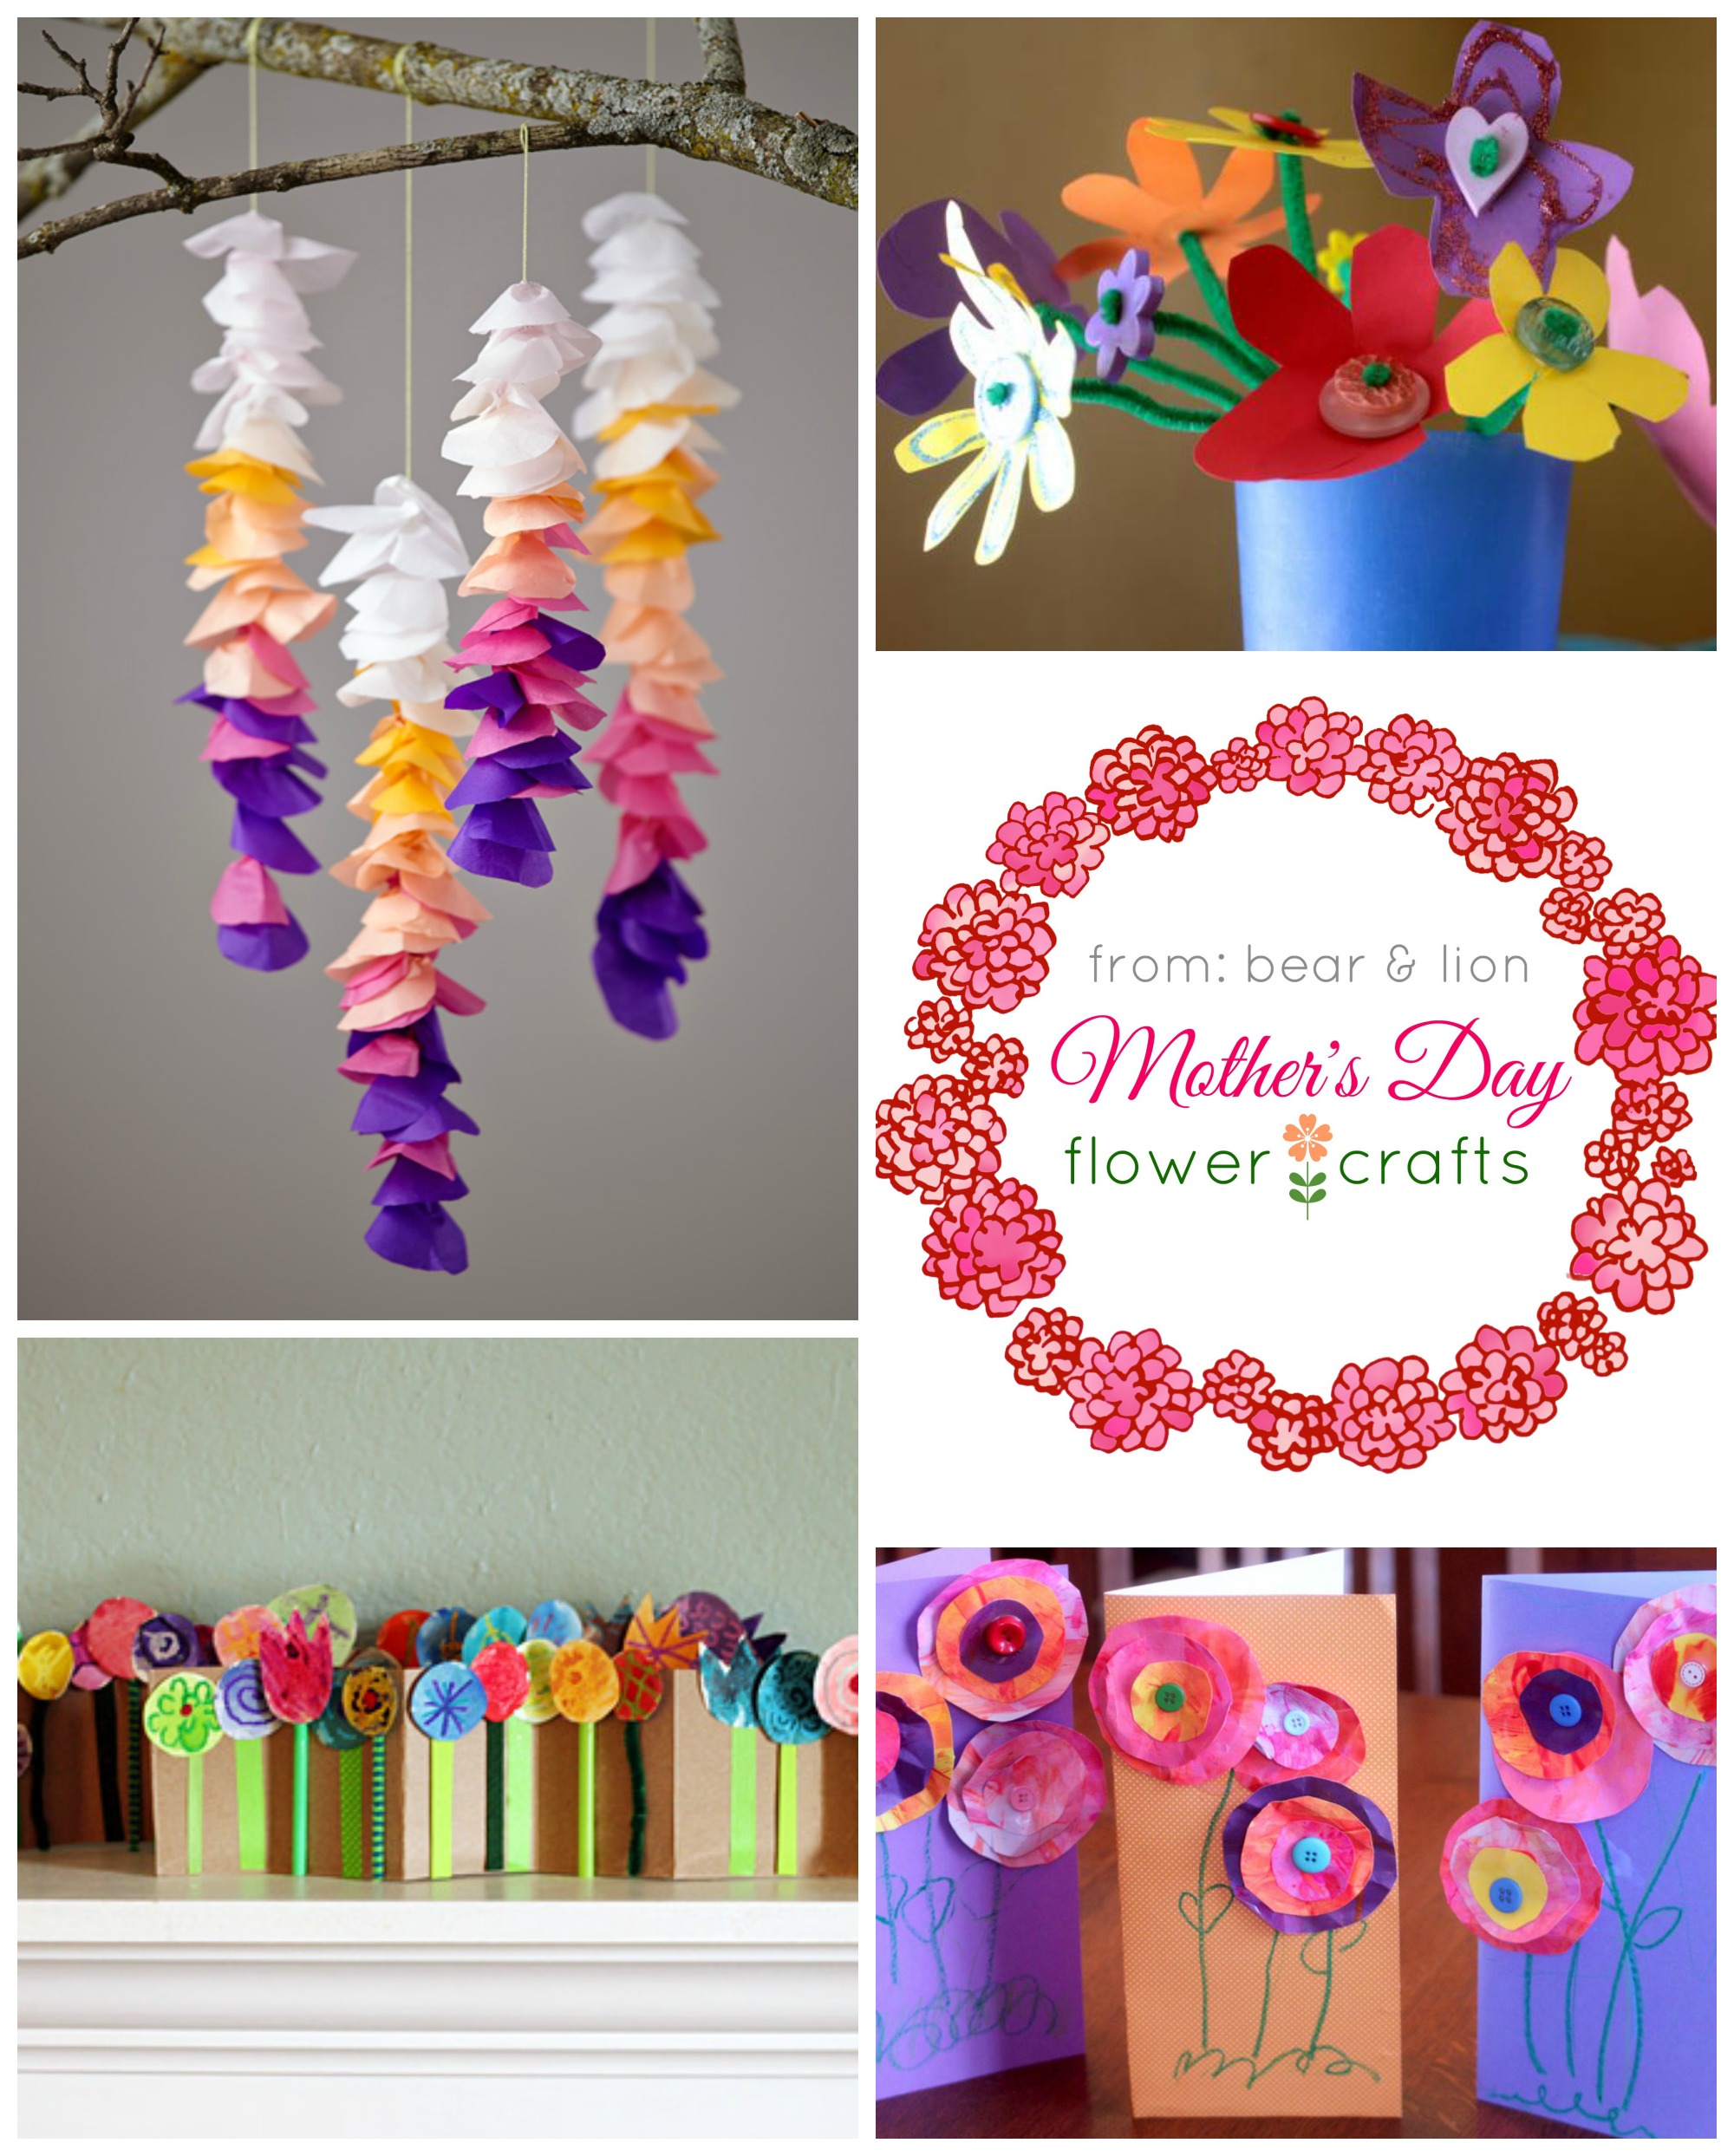 mother’s day flower crafts.